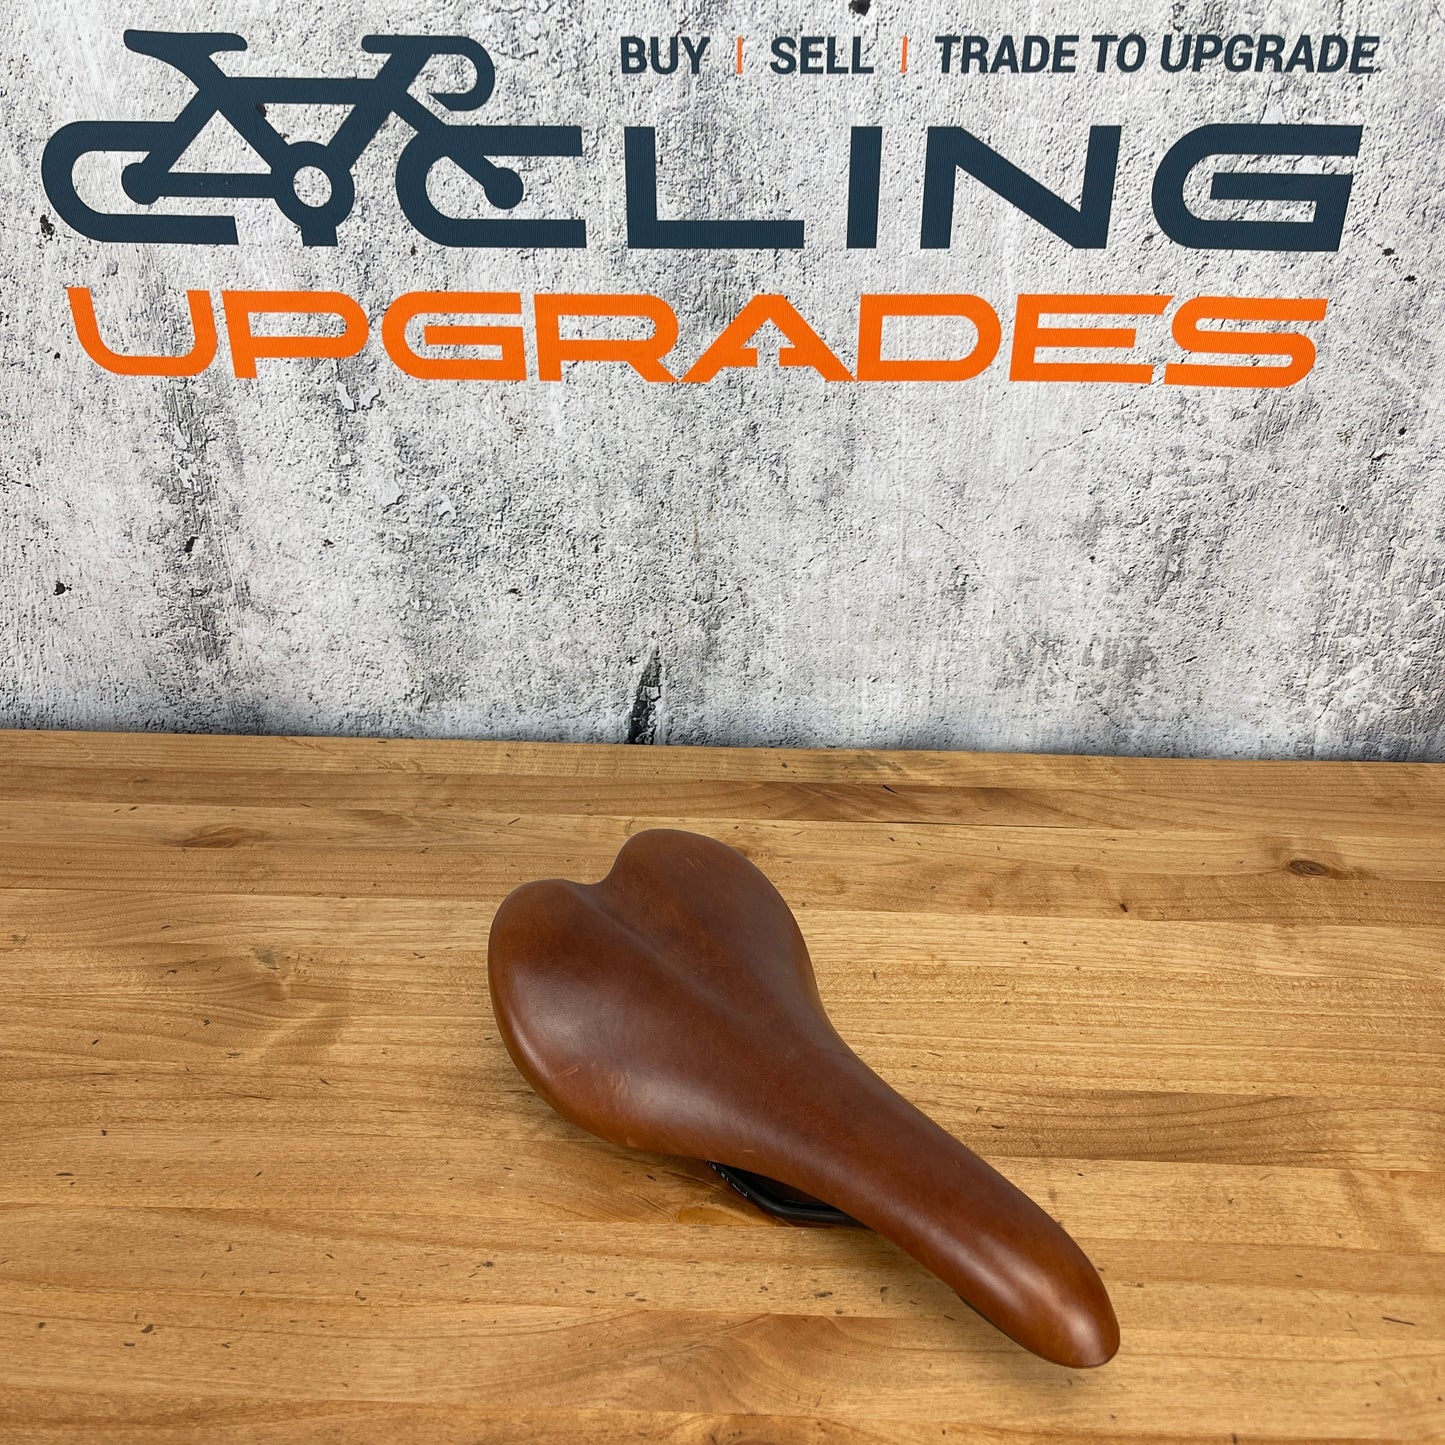 Fortune 7x7mm Alloy Rails Brown 138mm Cycling Saddle 315g